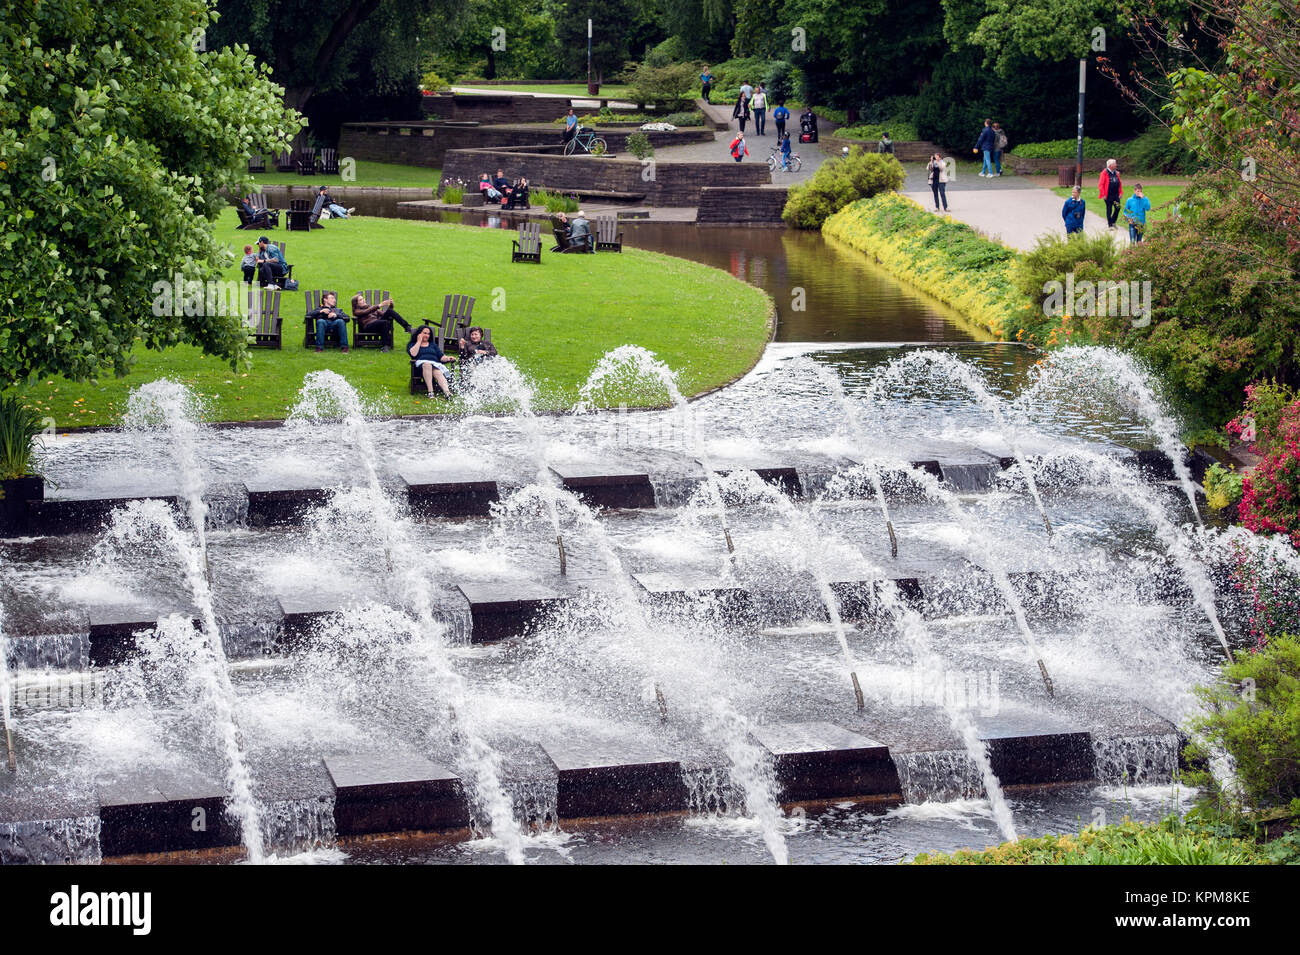 Hamburg, one of the most beautiful and most popular tourist destinations in the world. Park Planten + Blomen with Cascade. Stock Photo